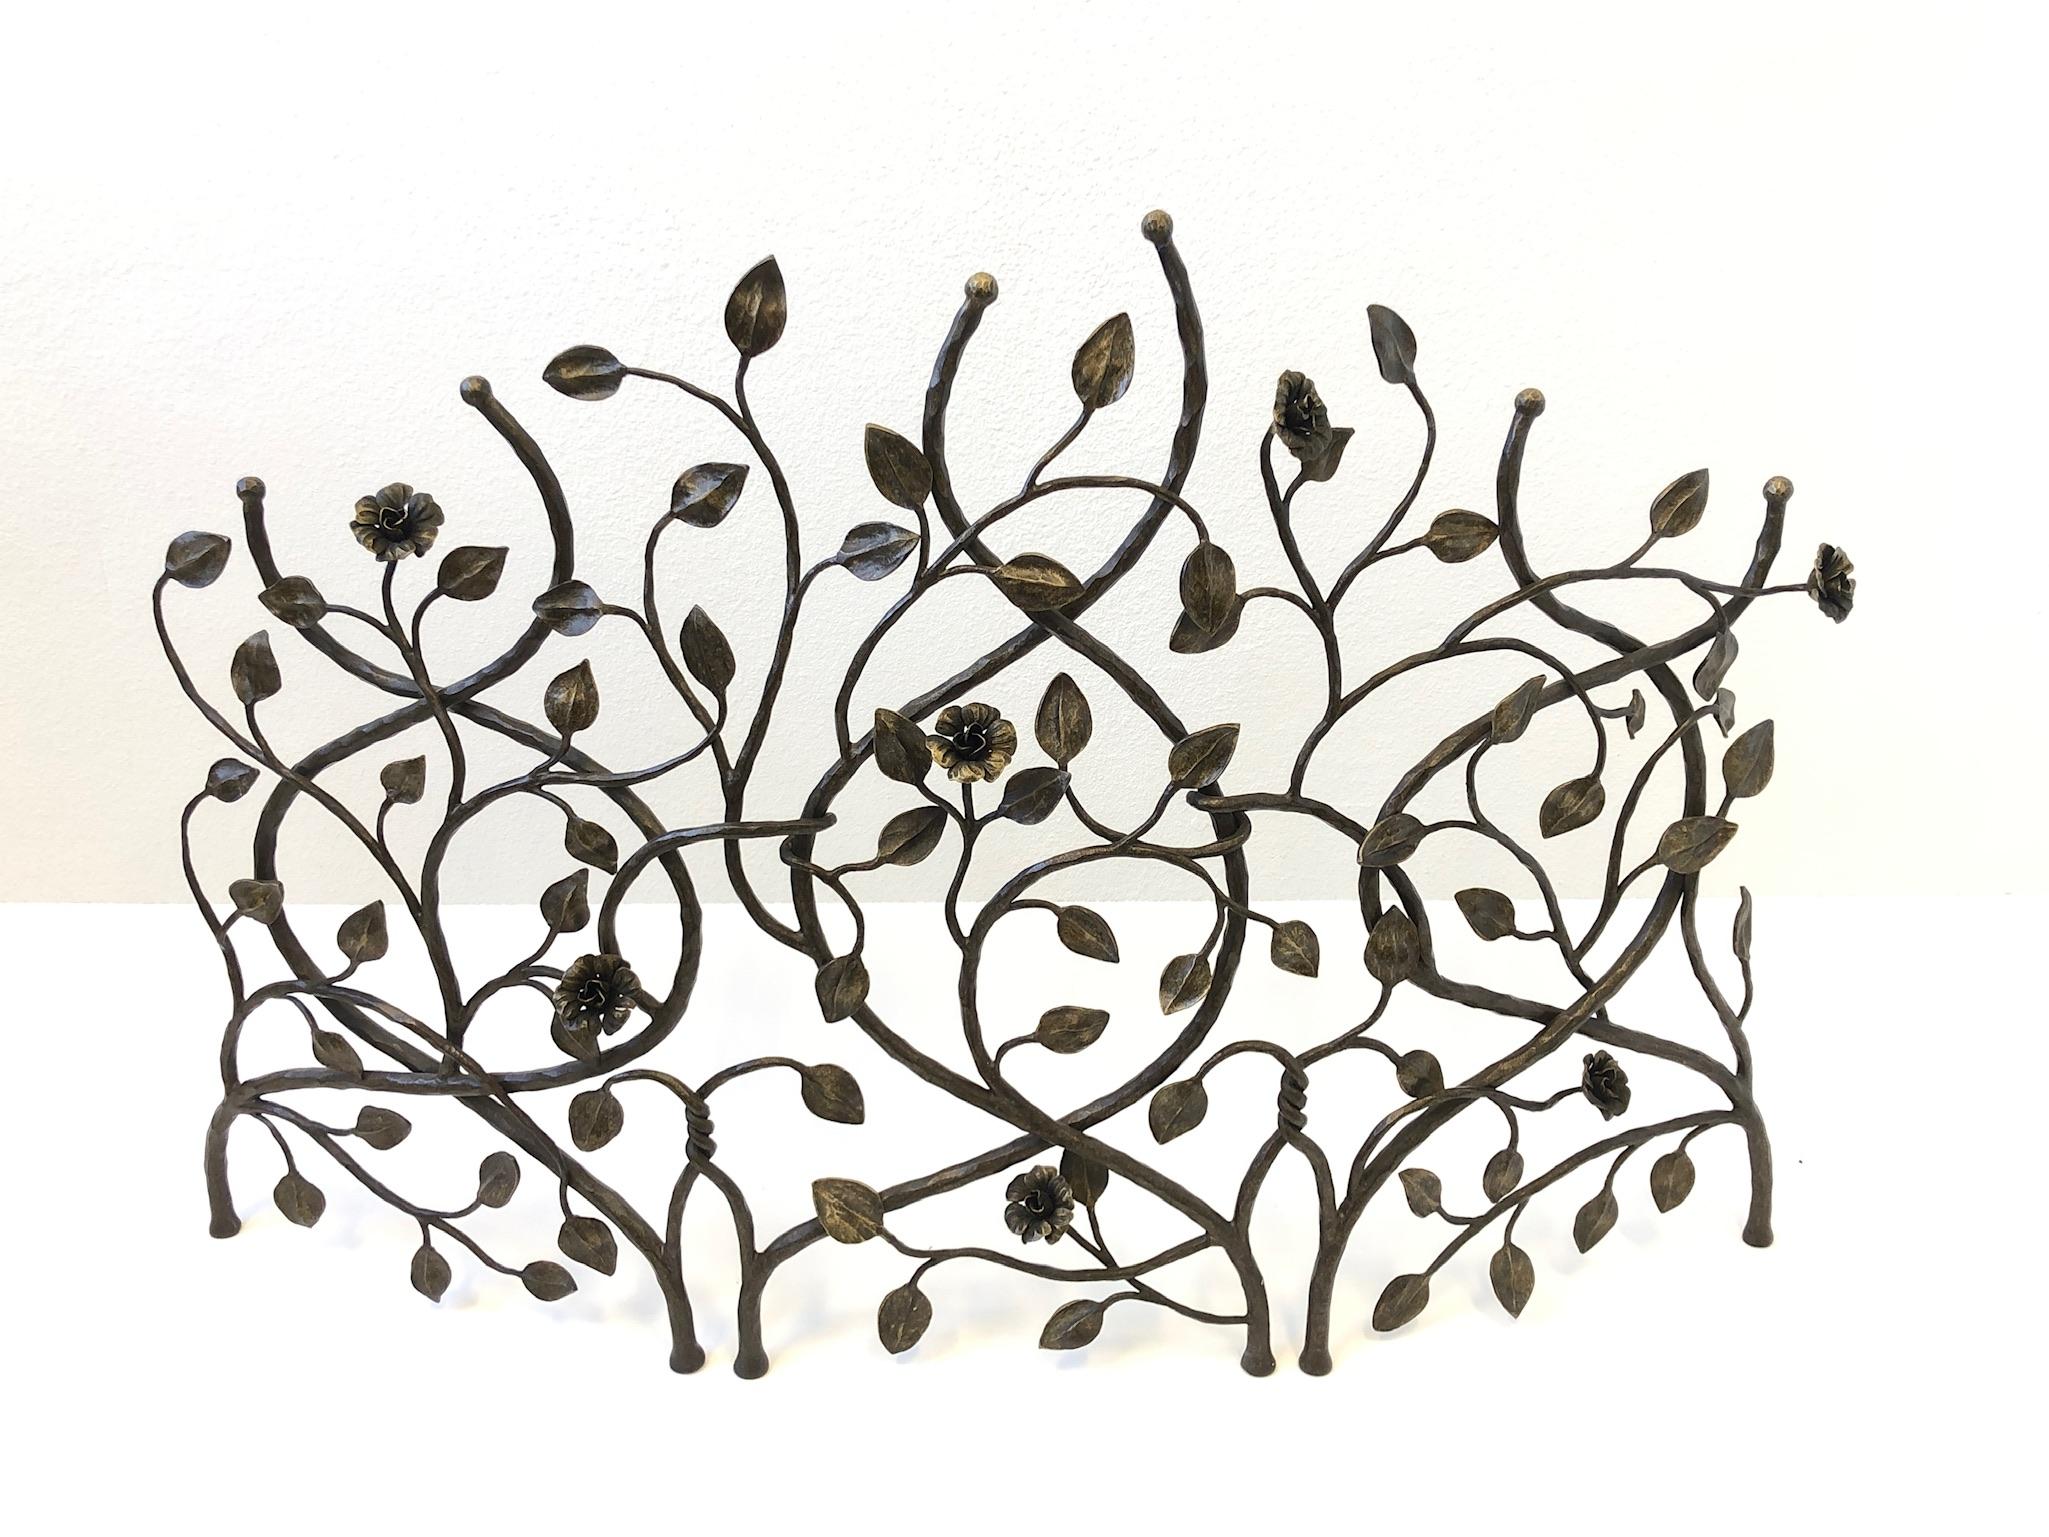 A beautiful custom forge steel fireplace screen, designed by Thomas Schwaiger in 1999.
It depicts intertwined vines with leaves and flowers. Constructed of forge steel with a bronze finish.
Stampt Schwaiger 1999.
Measurements: 36” high, 55.5”